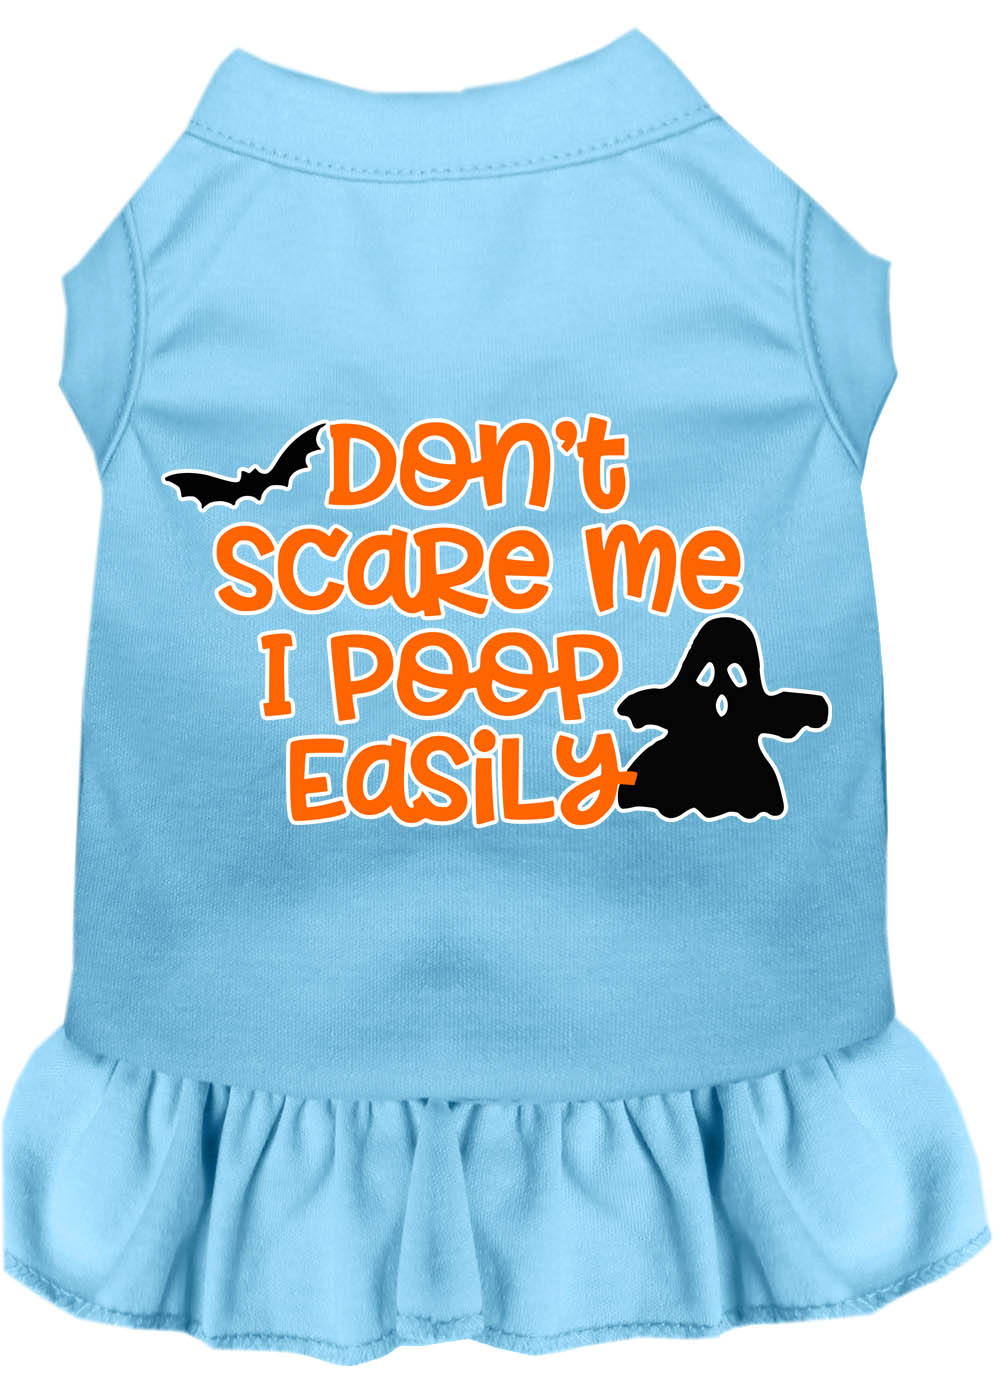 Don't Scare Me, Poops Easily Screen Print Dog Dress Baby Blue XS